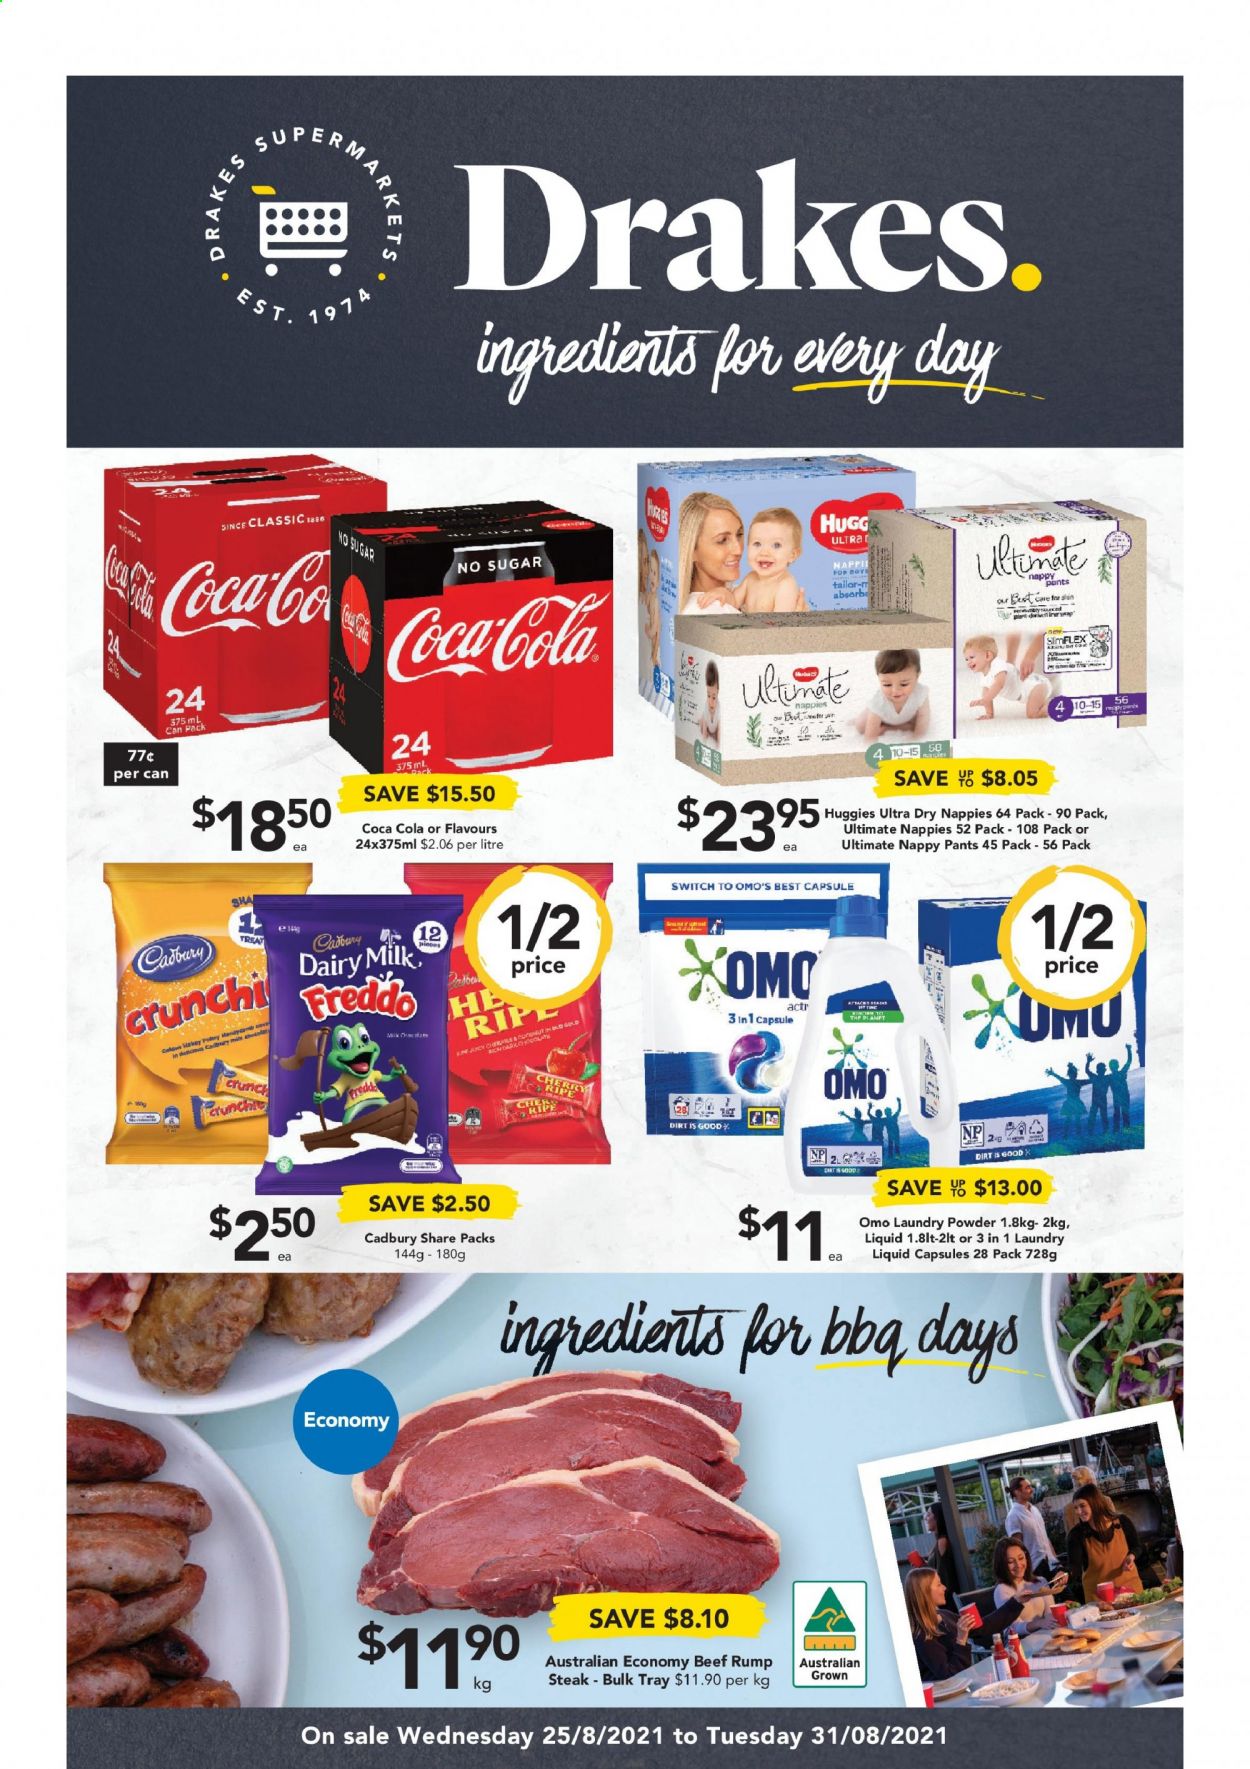 thumbnail - Drakes Catalogue - 25 Aug 2021 - 31 Aug 2021 - Sales products - cherries, polony, Cadbury, Dairy Milk, Coca-Cola, switch, beef meat, steak, rump steak, Huggies, pants, nappies, Omo, laundry powder, laundry detergent. Page 1.